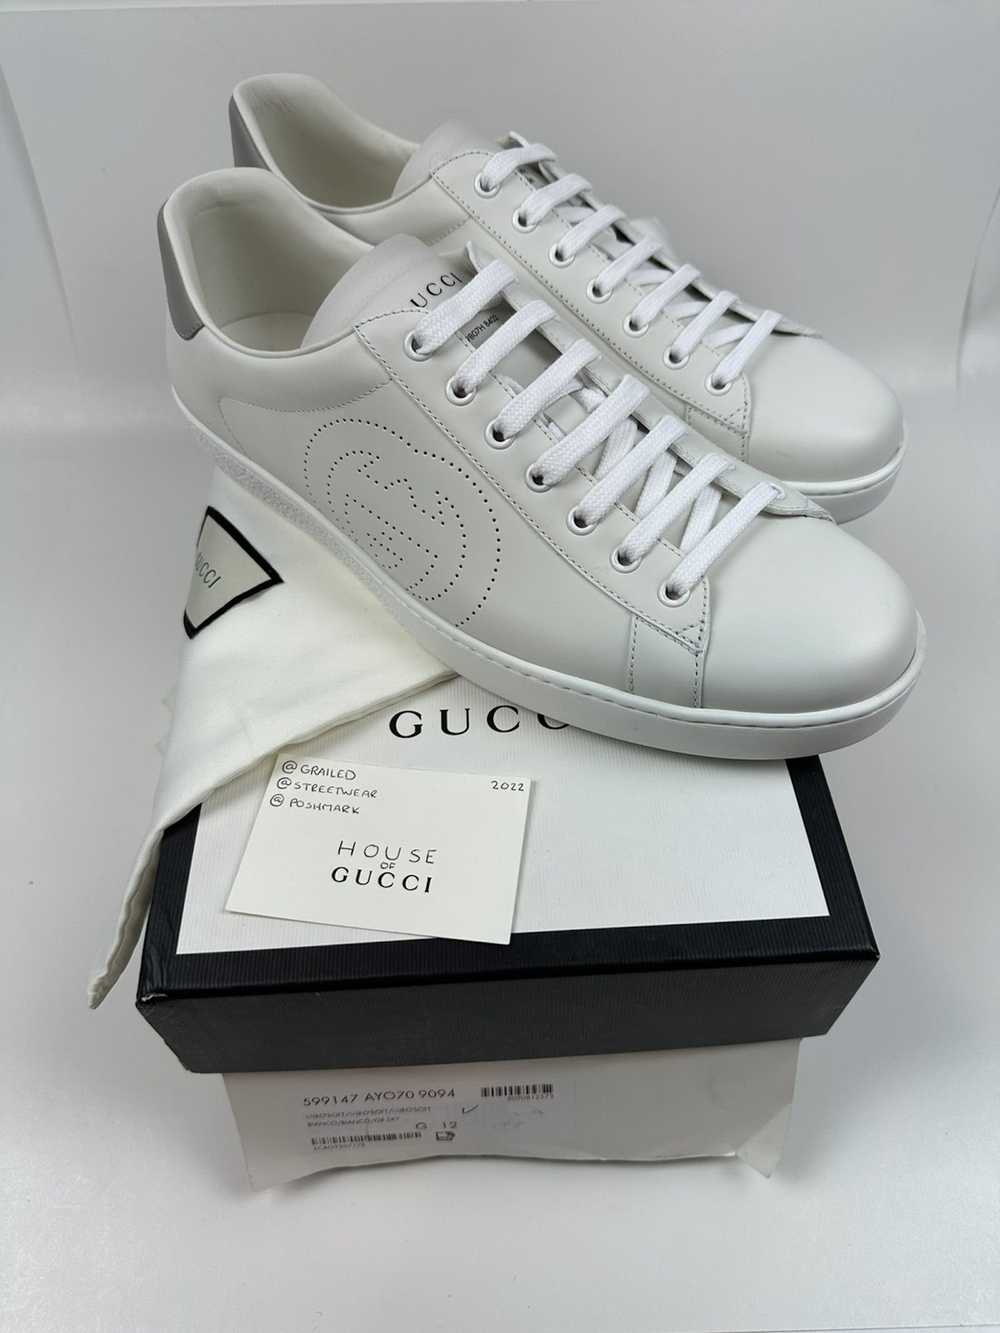 Gucci Gucci Ace Perforated GG Sneakers - image 4